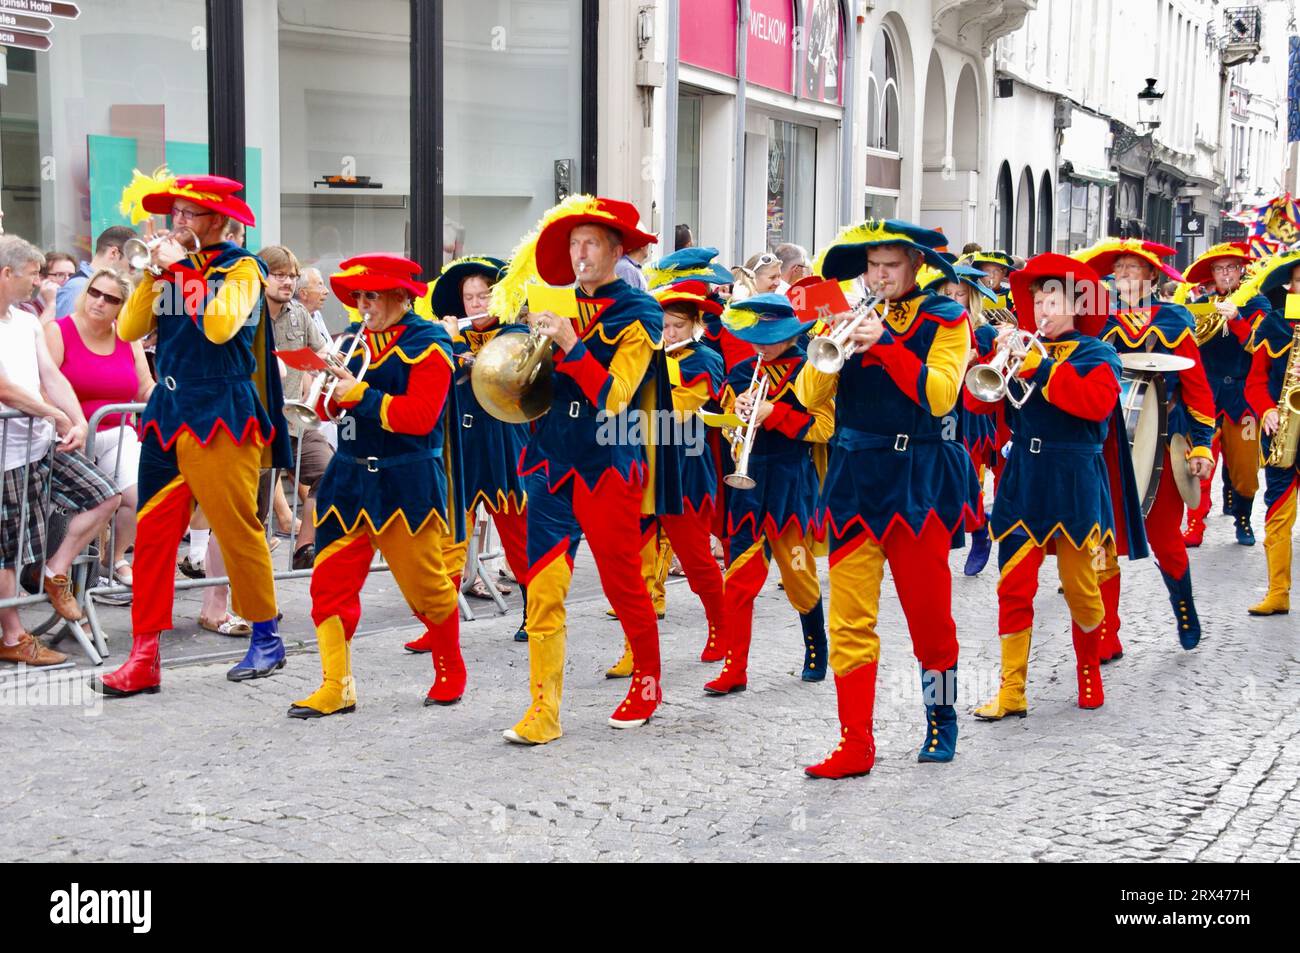 Marchers in colourful outfits in The 2012 Procession of the Golden Tree Pageant, held every 5 years since 1958. Bruges, Belgium. Stock Photo